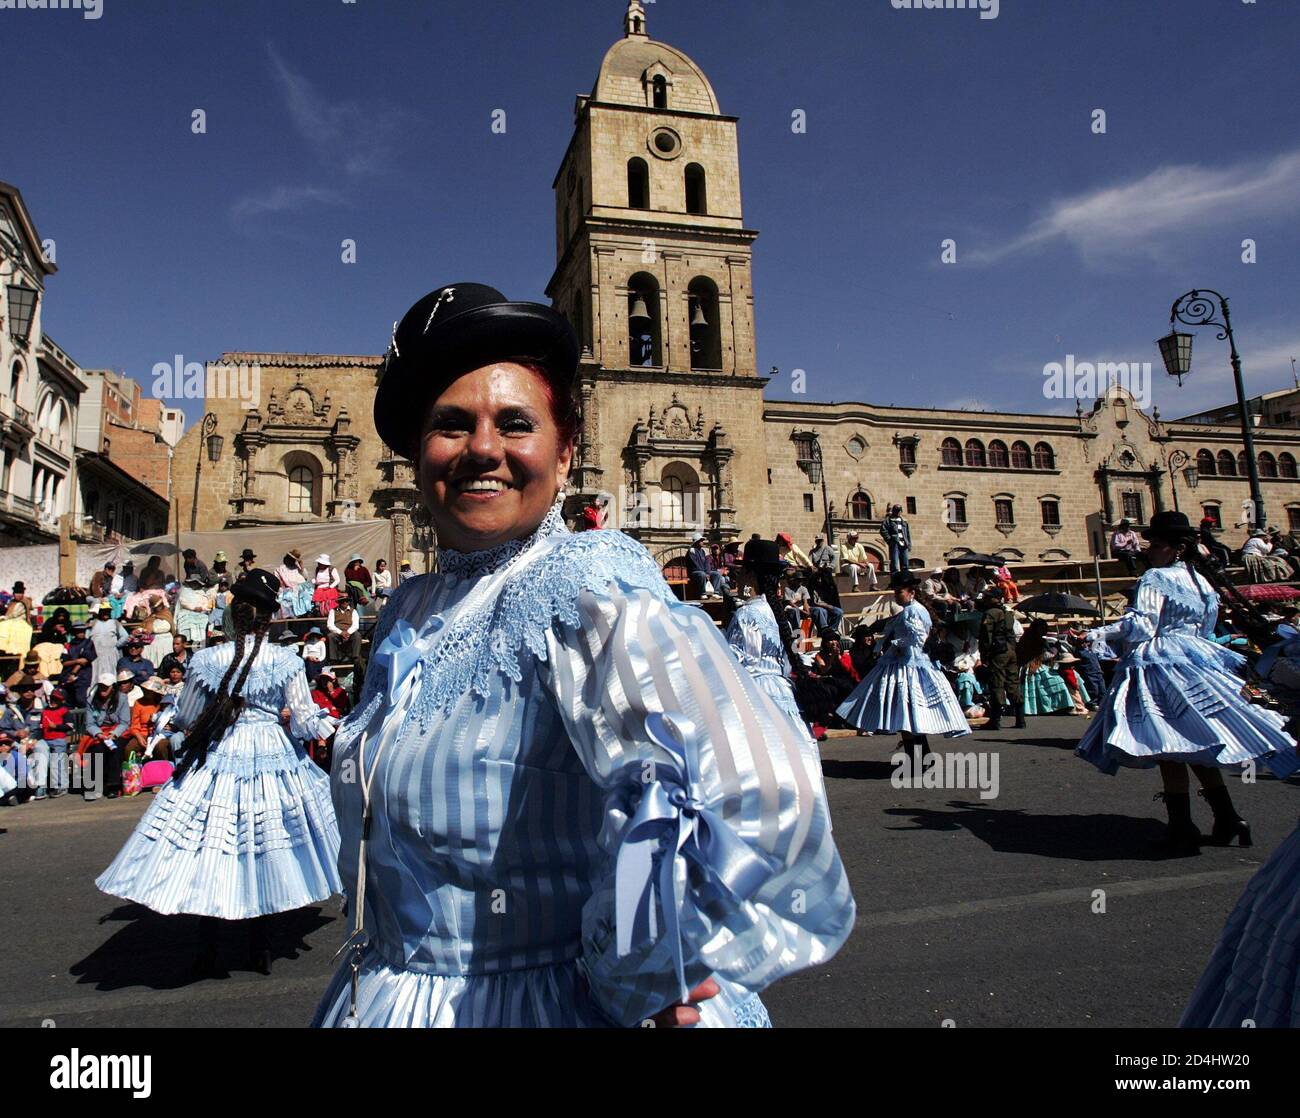 Bolivian women dance in front of the San Francisco church as they take part in the 'El Senor del Gran Poder' (Feast of the Great Power of Jesus) festival in La Paz, Bolivia May 21, 2005. The feast, which is one of the most important and expressive manifestations of La Paz's cultural identity, had its origins in the arrival in the Ch'ijini area of a canvas showing a three-faced figure. The image was reinterpreted according to the Aymara tradition to mean that one asked the face on the right for good things, the left for negative things, while one prayed to the center face. The Catholic Church h Stock Photo